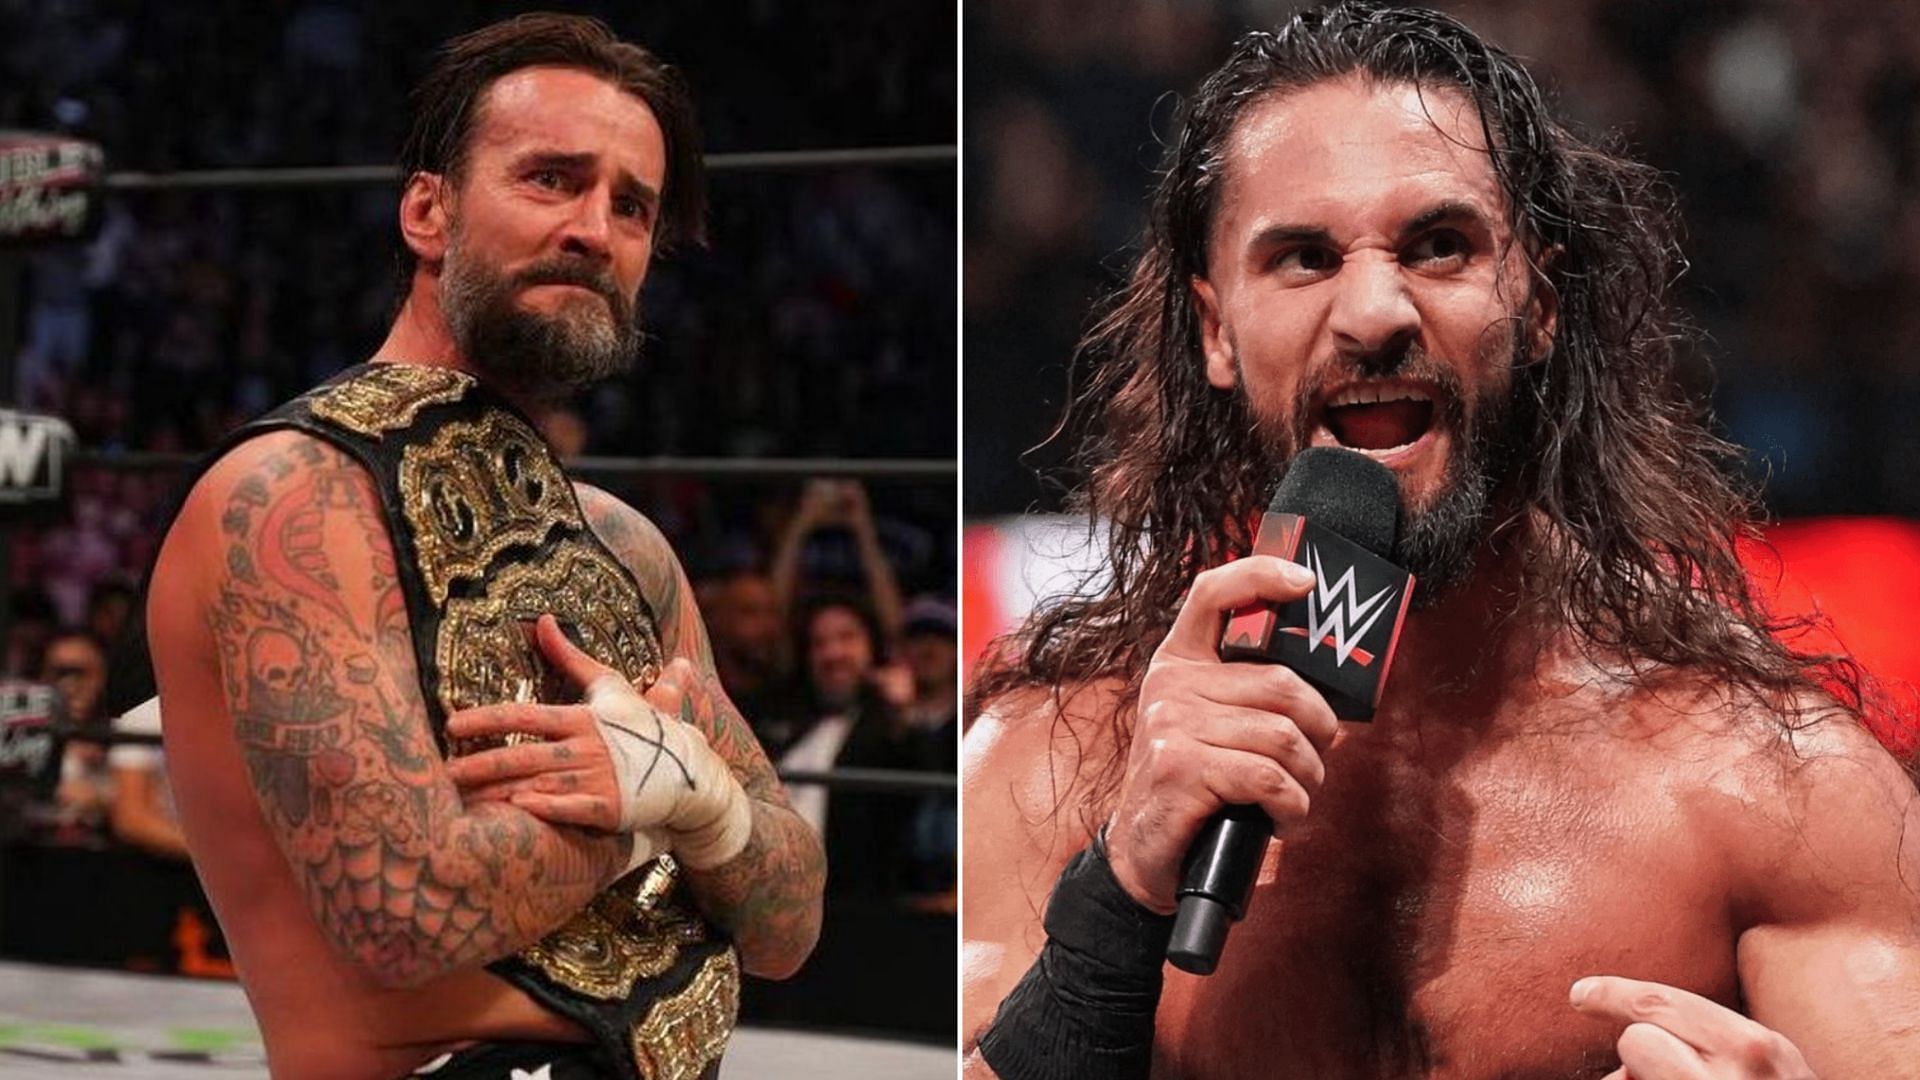 "He was shooting 100%" - WWE Hall of Famer says Seth Rollins was serious about CM Punk comments